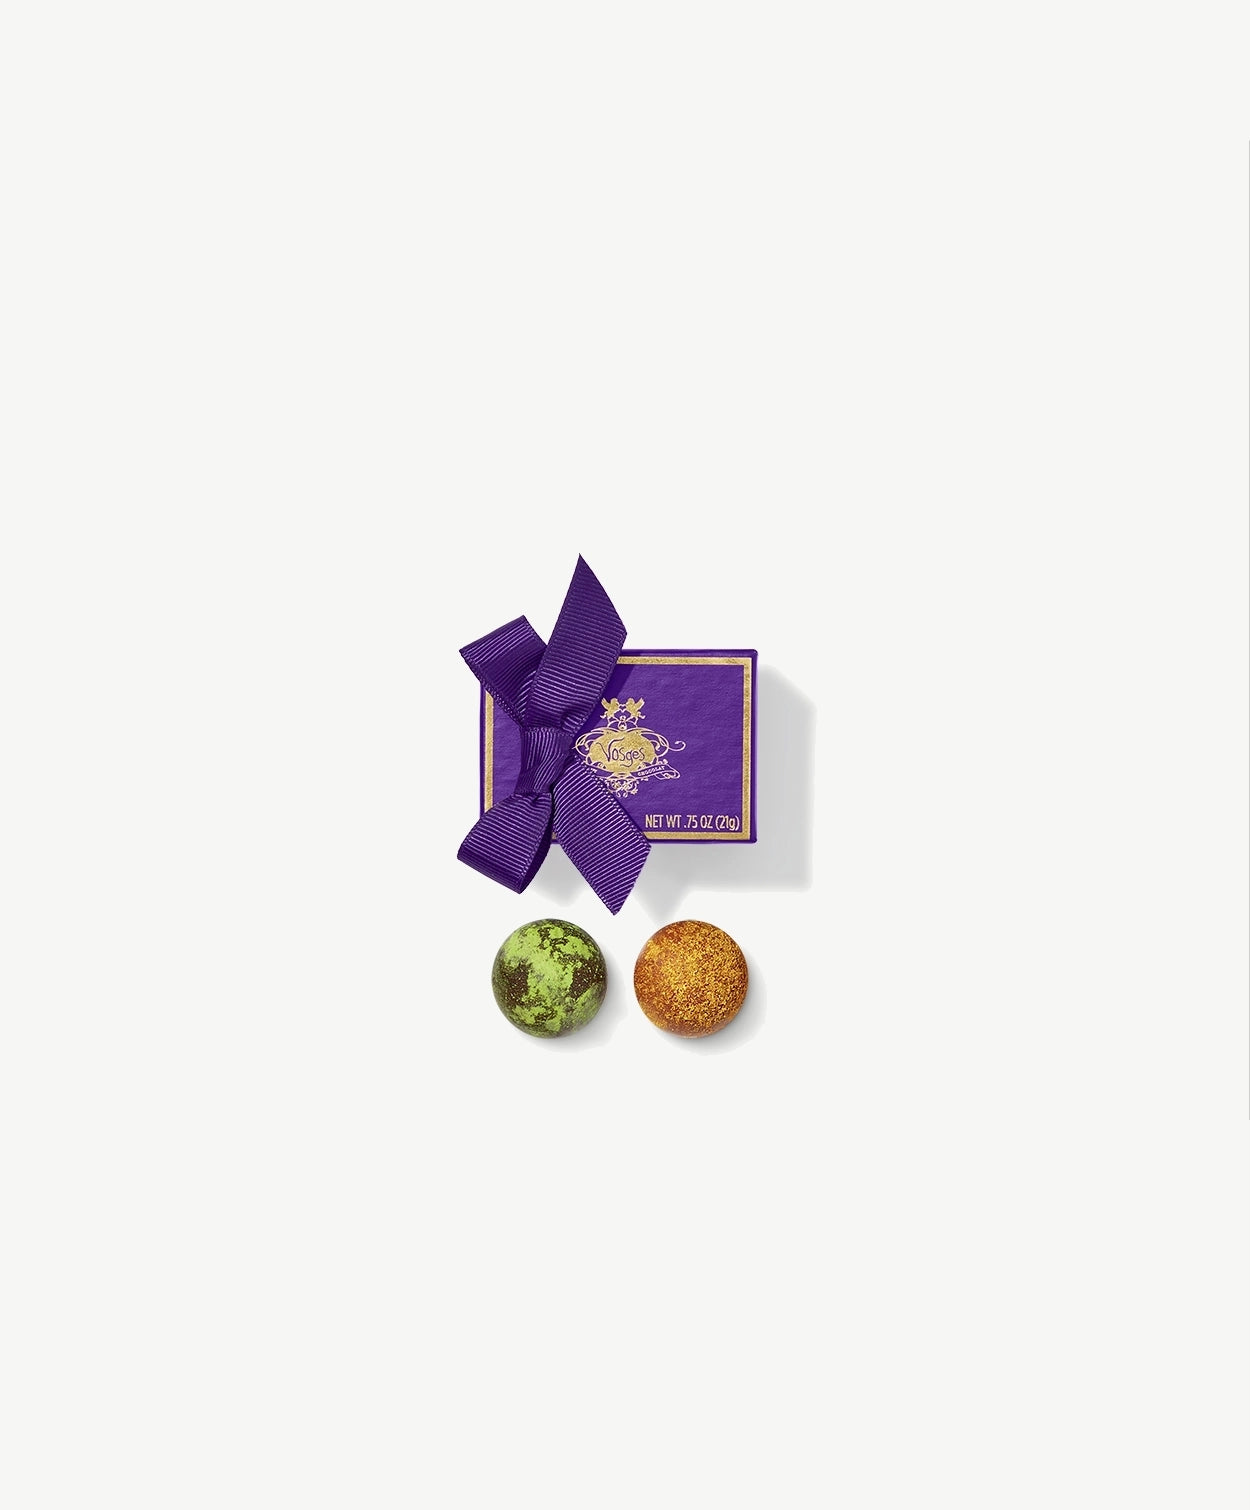 A Vosges Naga Truffle and Black Pearl Truffle dusted in toasted curry and green Matcha powder sit side by side in-front a small purple candy box tied with a purple ribbon bow on a grey background.